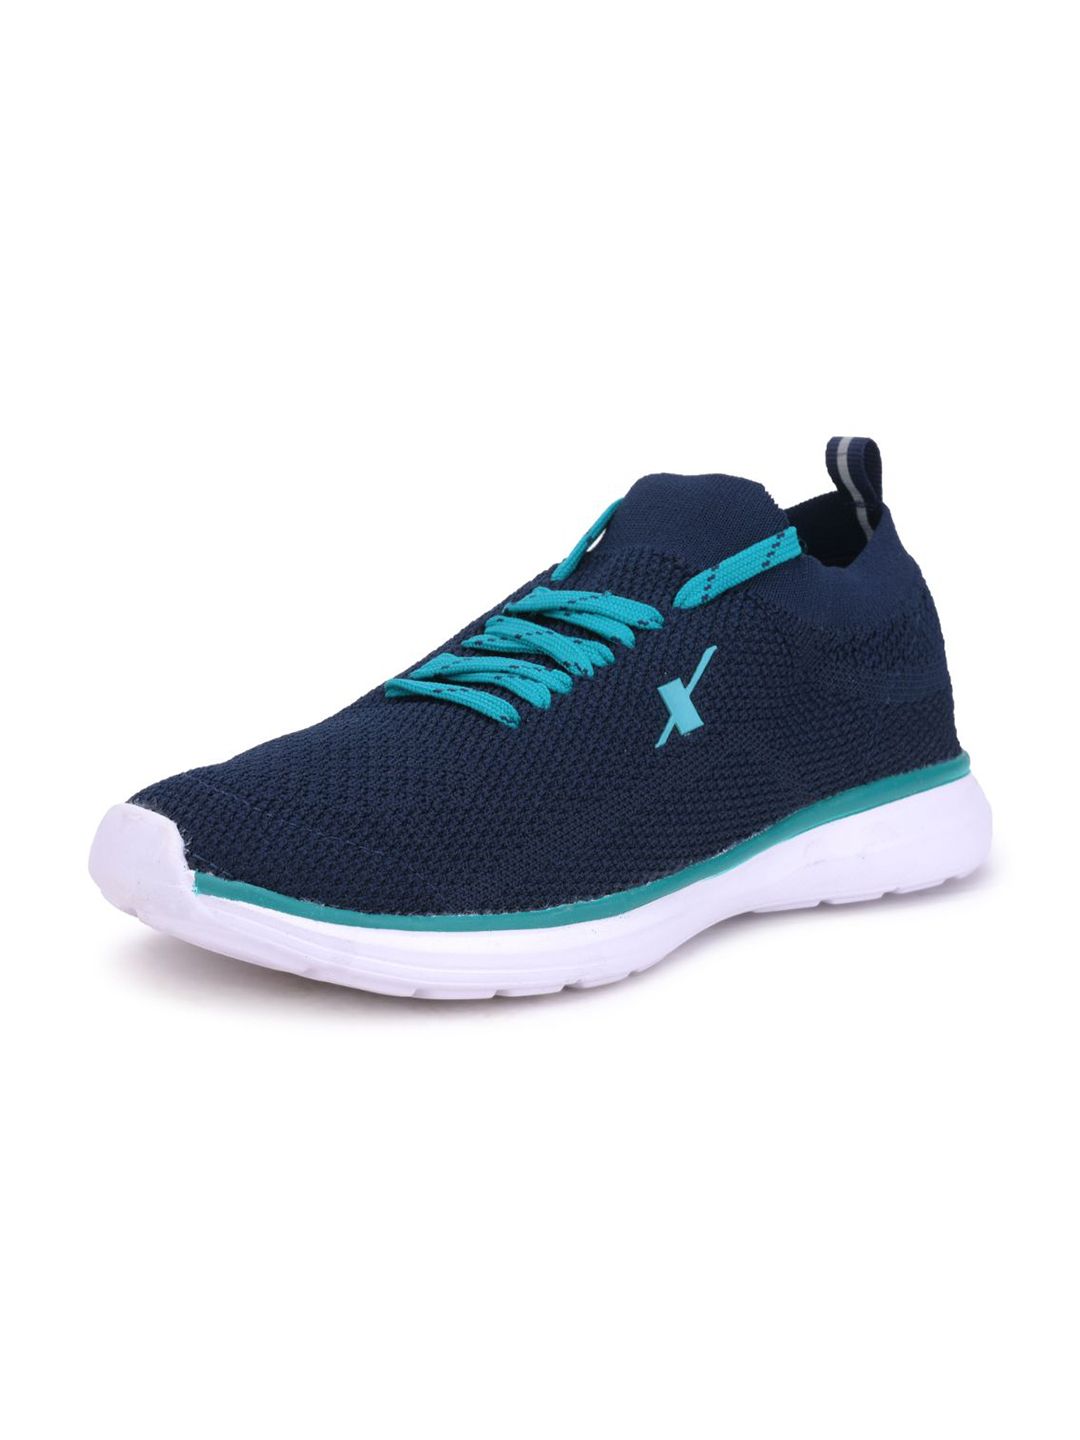 Sparx Women Navy Blue Mesh Running Shoes Price in India